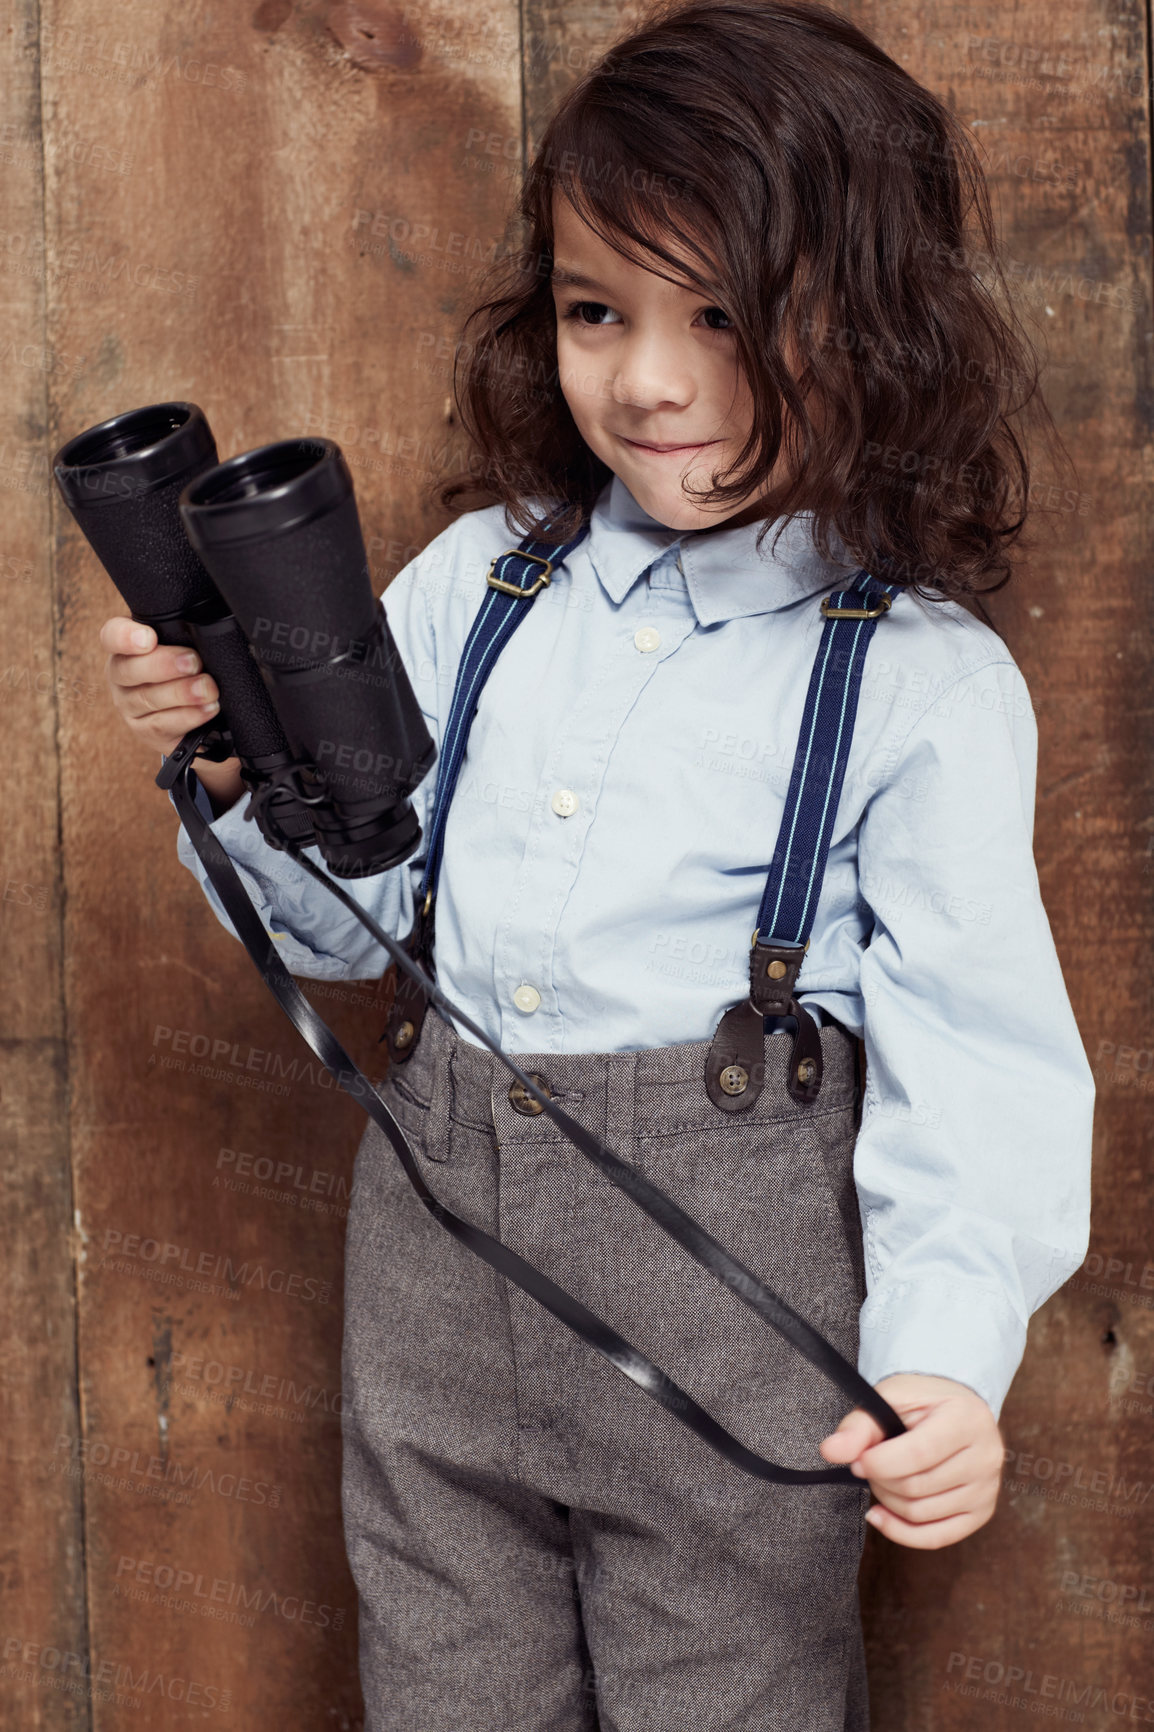 Buy stock photo Vintage, child and boy with binoculars or fashion, style and clothes for costume on wood background or studio. Retro, kid and confidence in old fashioned spy aesthetic with shirt and suspenders